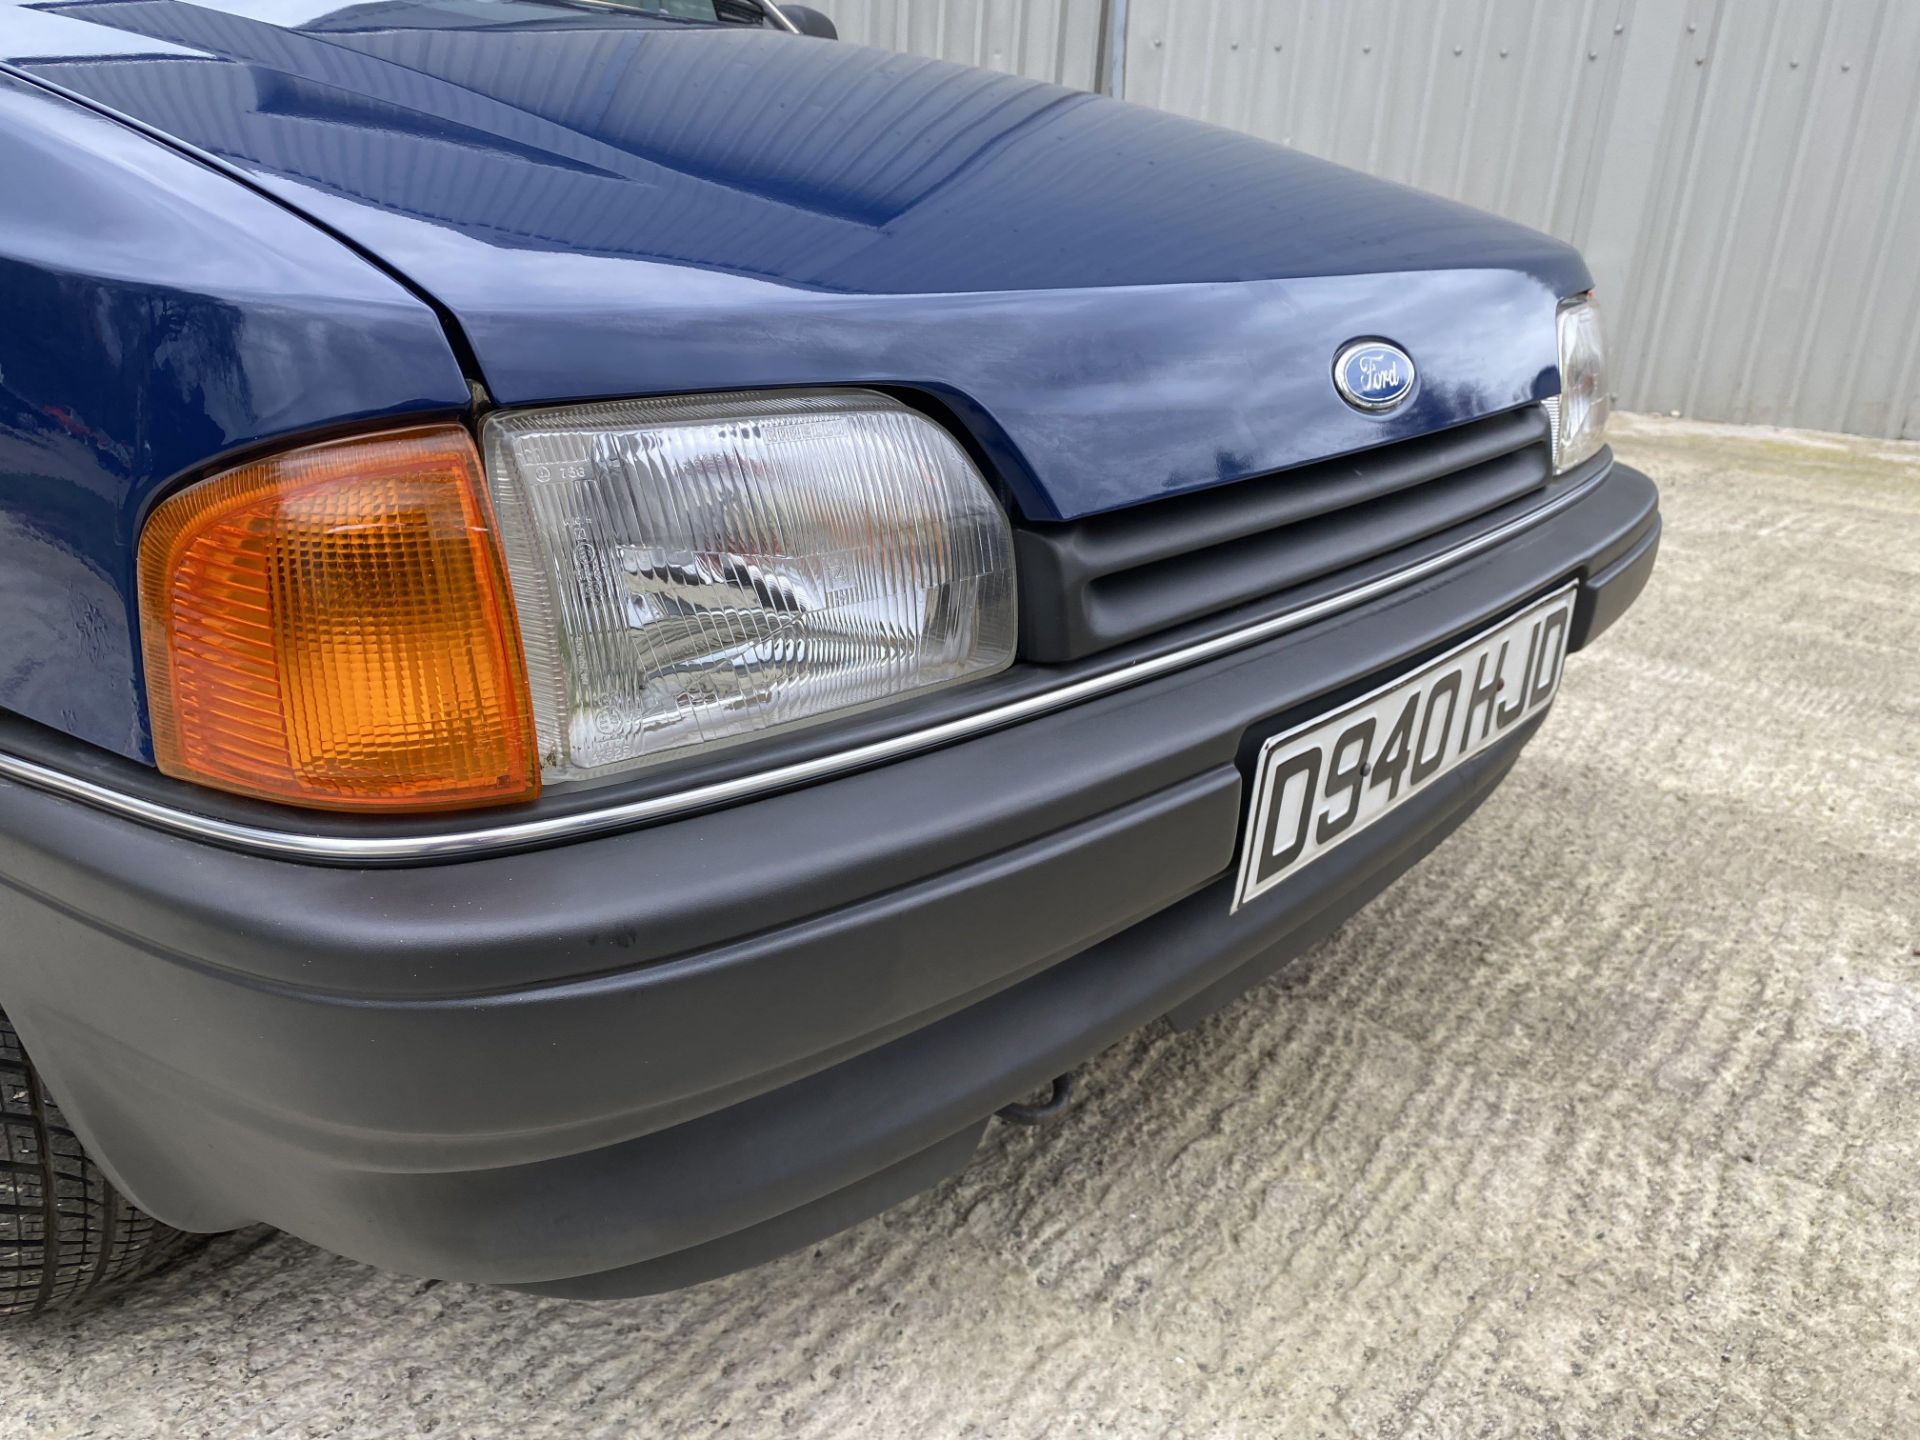 Ford Orion 1.6 GL - Image 12 of 42